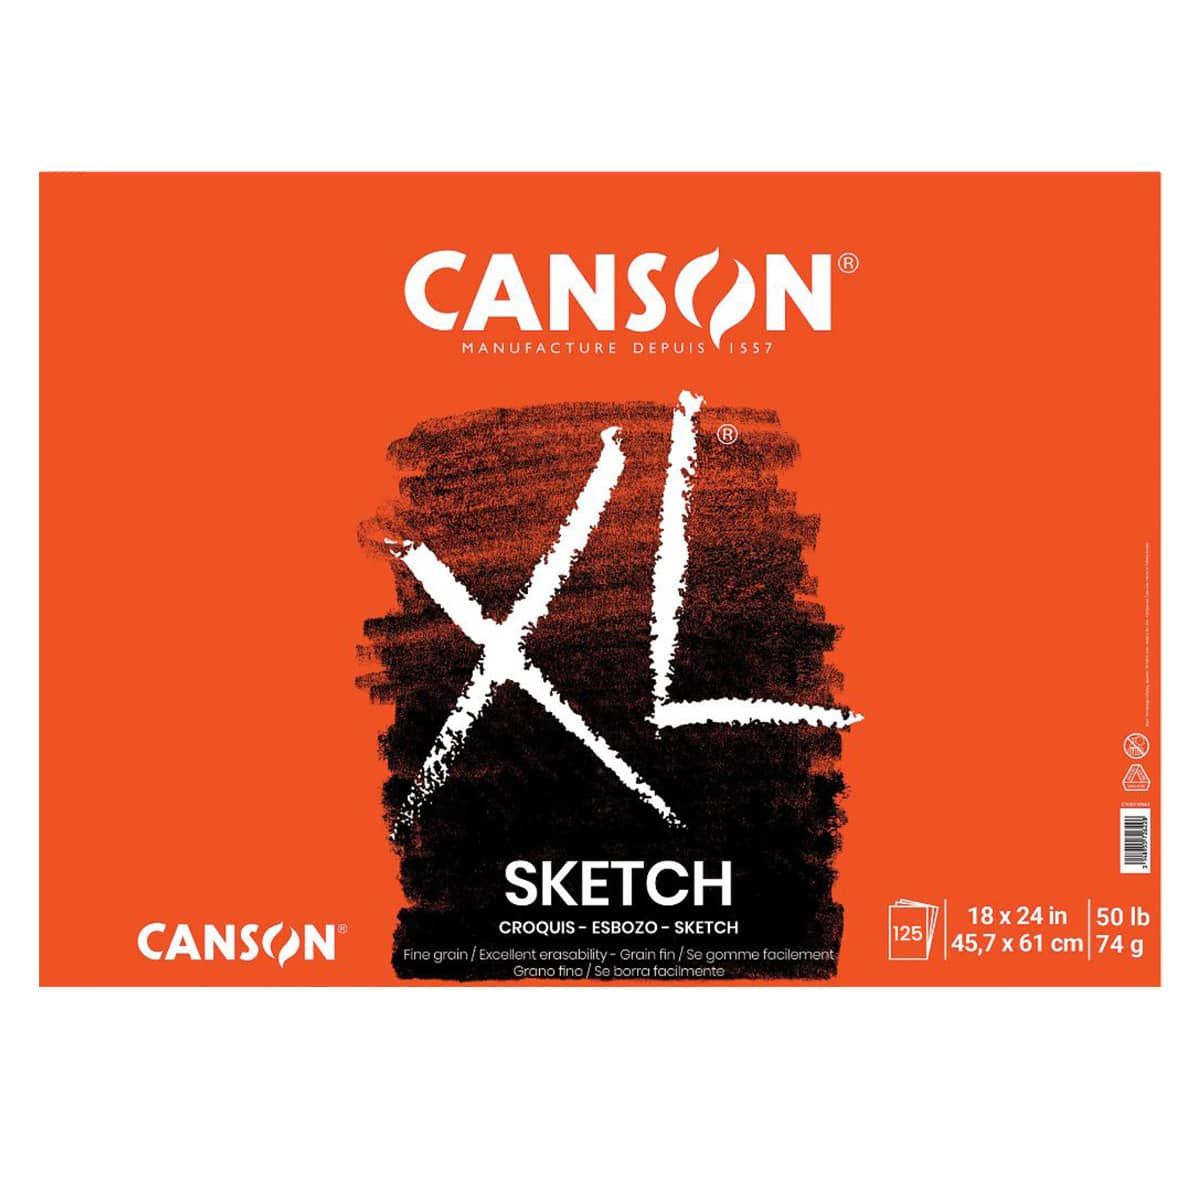 Canson - Artist Series Pure White Drawing Pad - 18 x 24